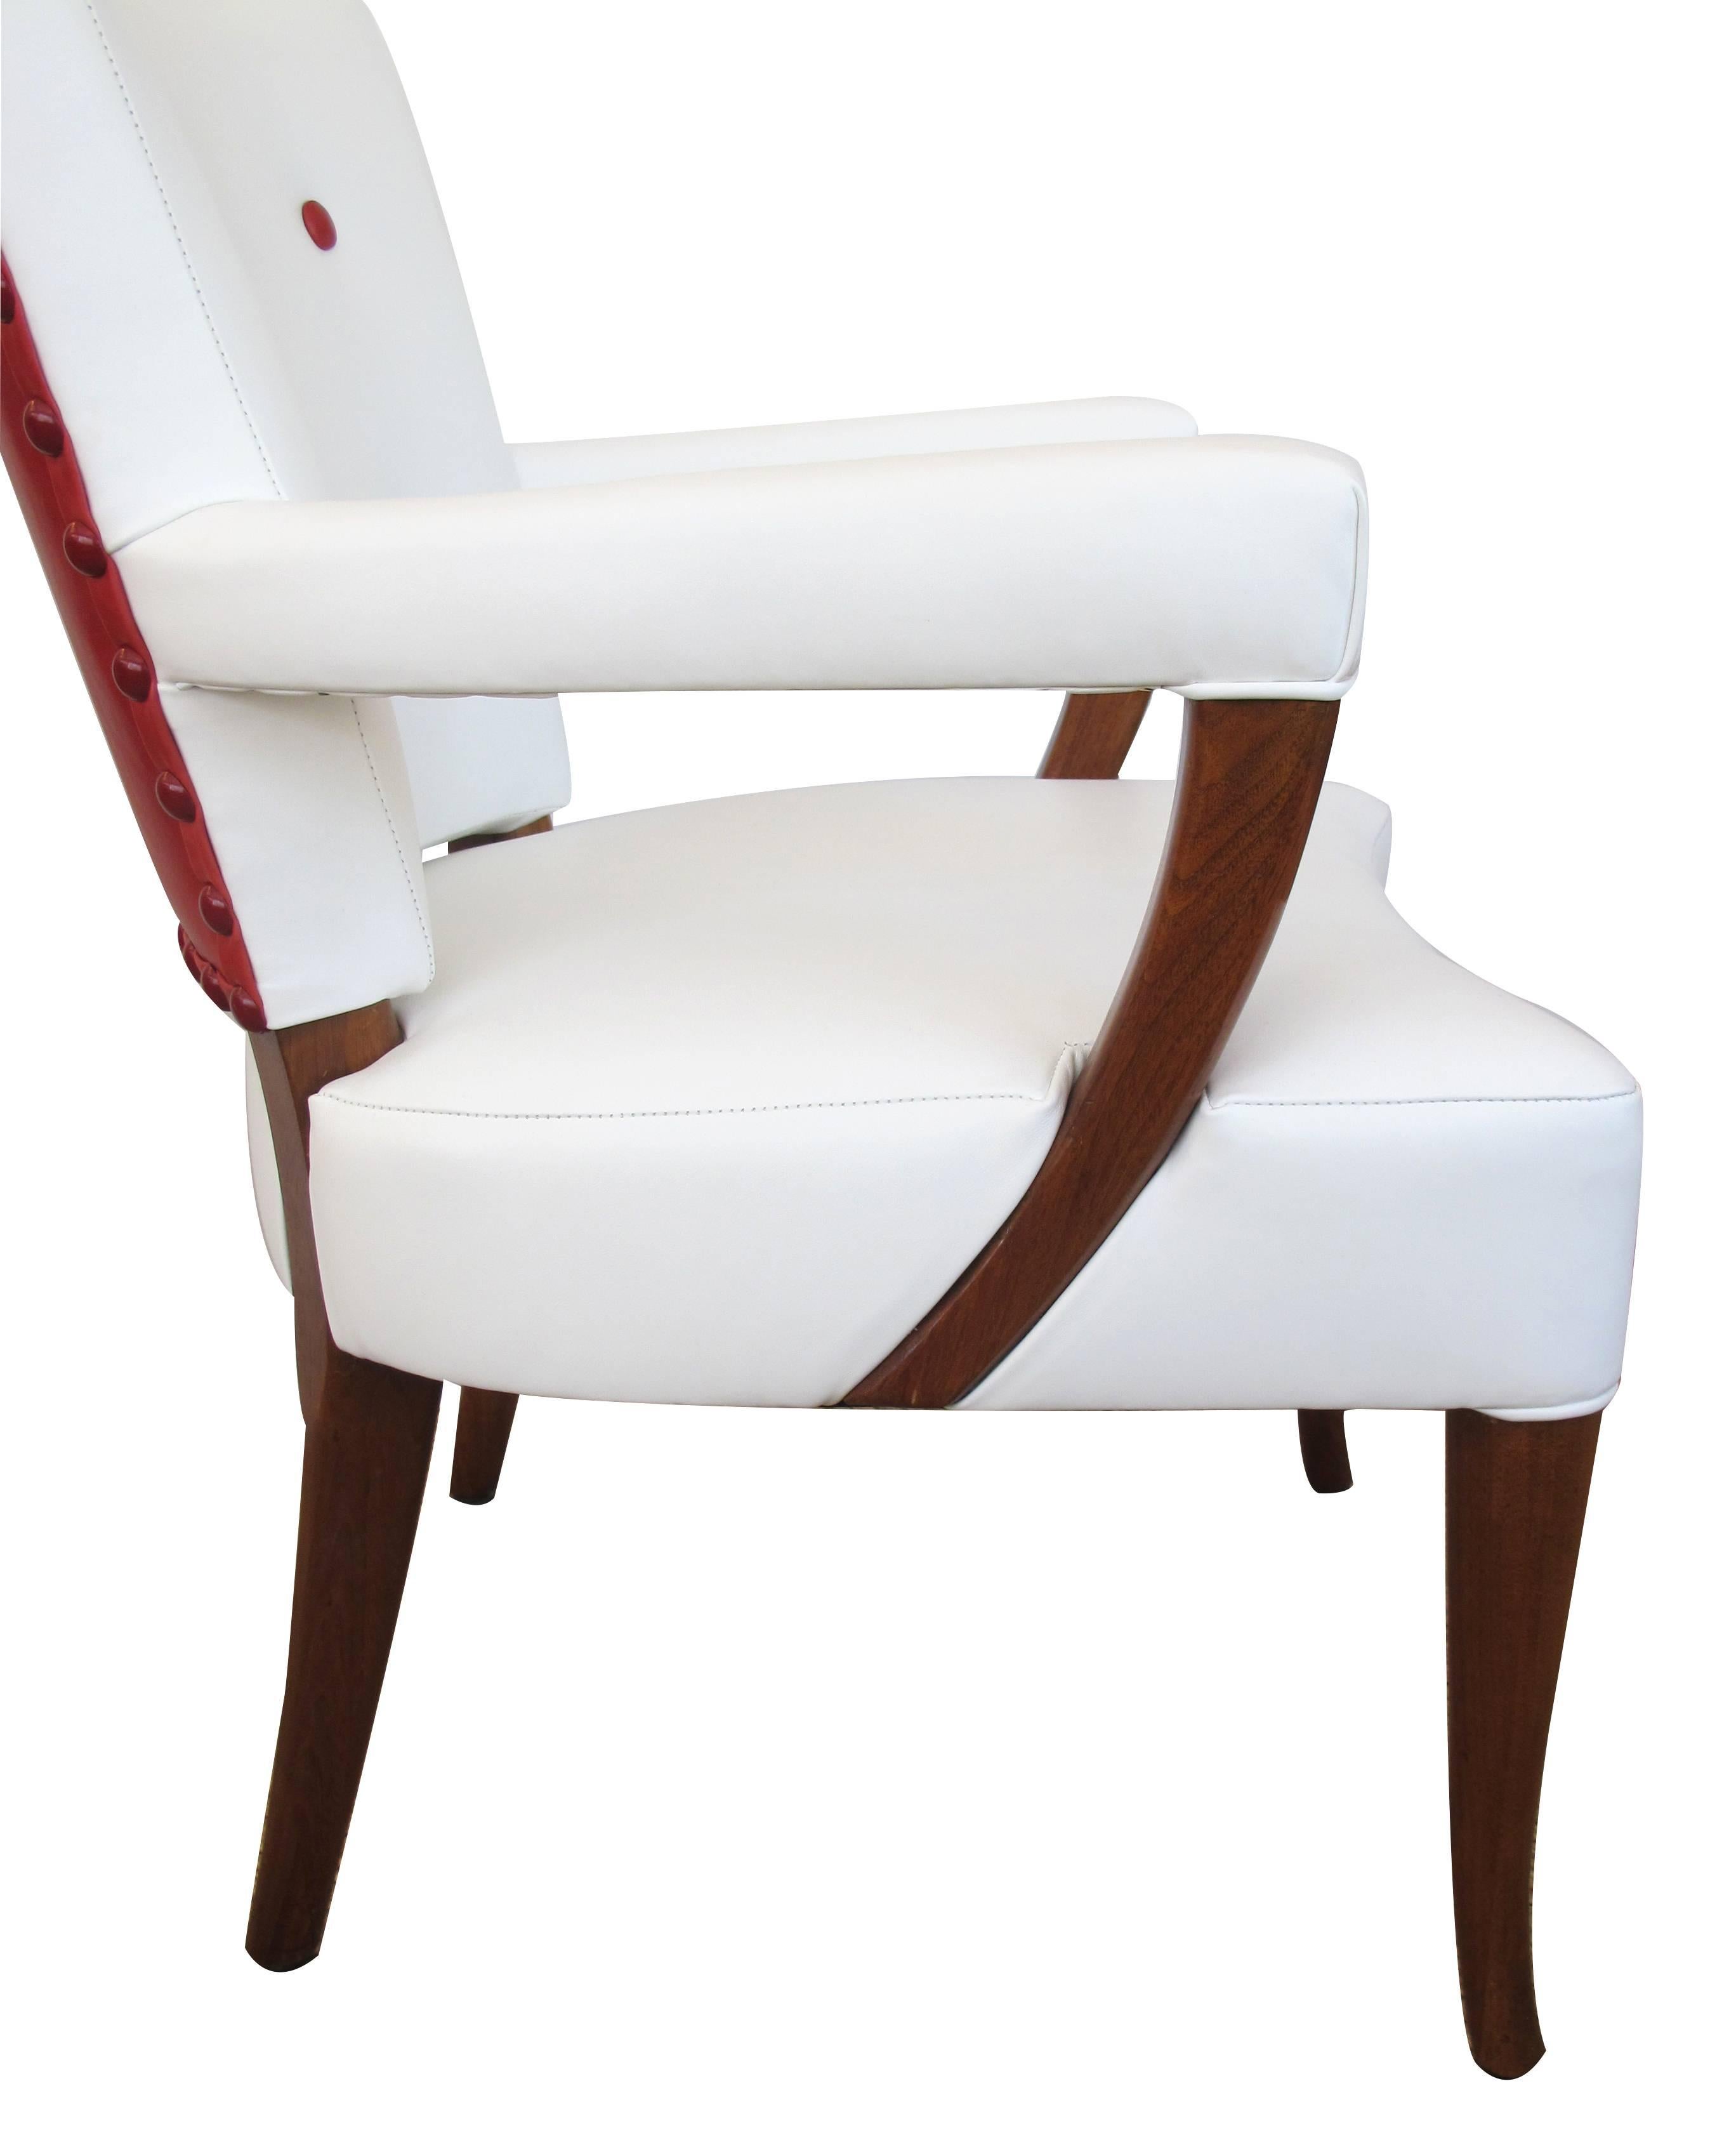 Mid-20th Century Stylish Set of Four American 1940s White and Red Leather Upholstered Game Chairs